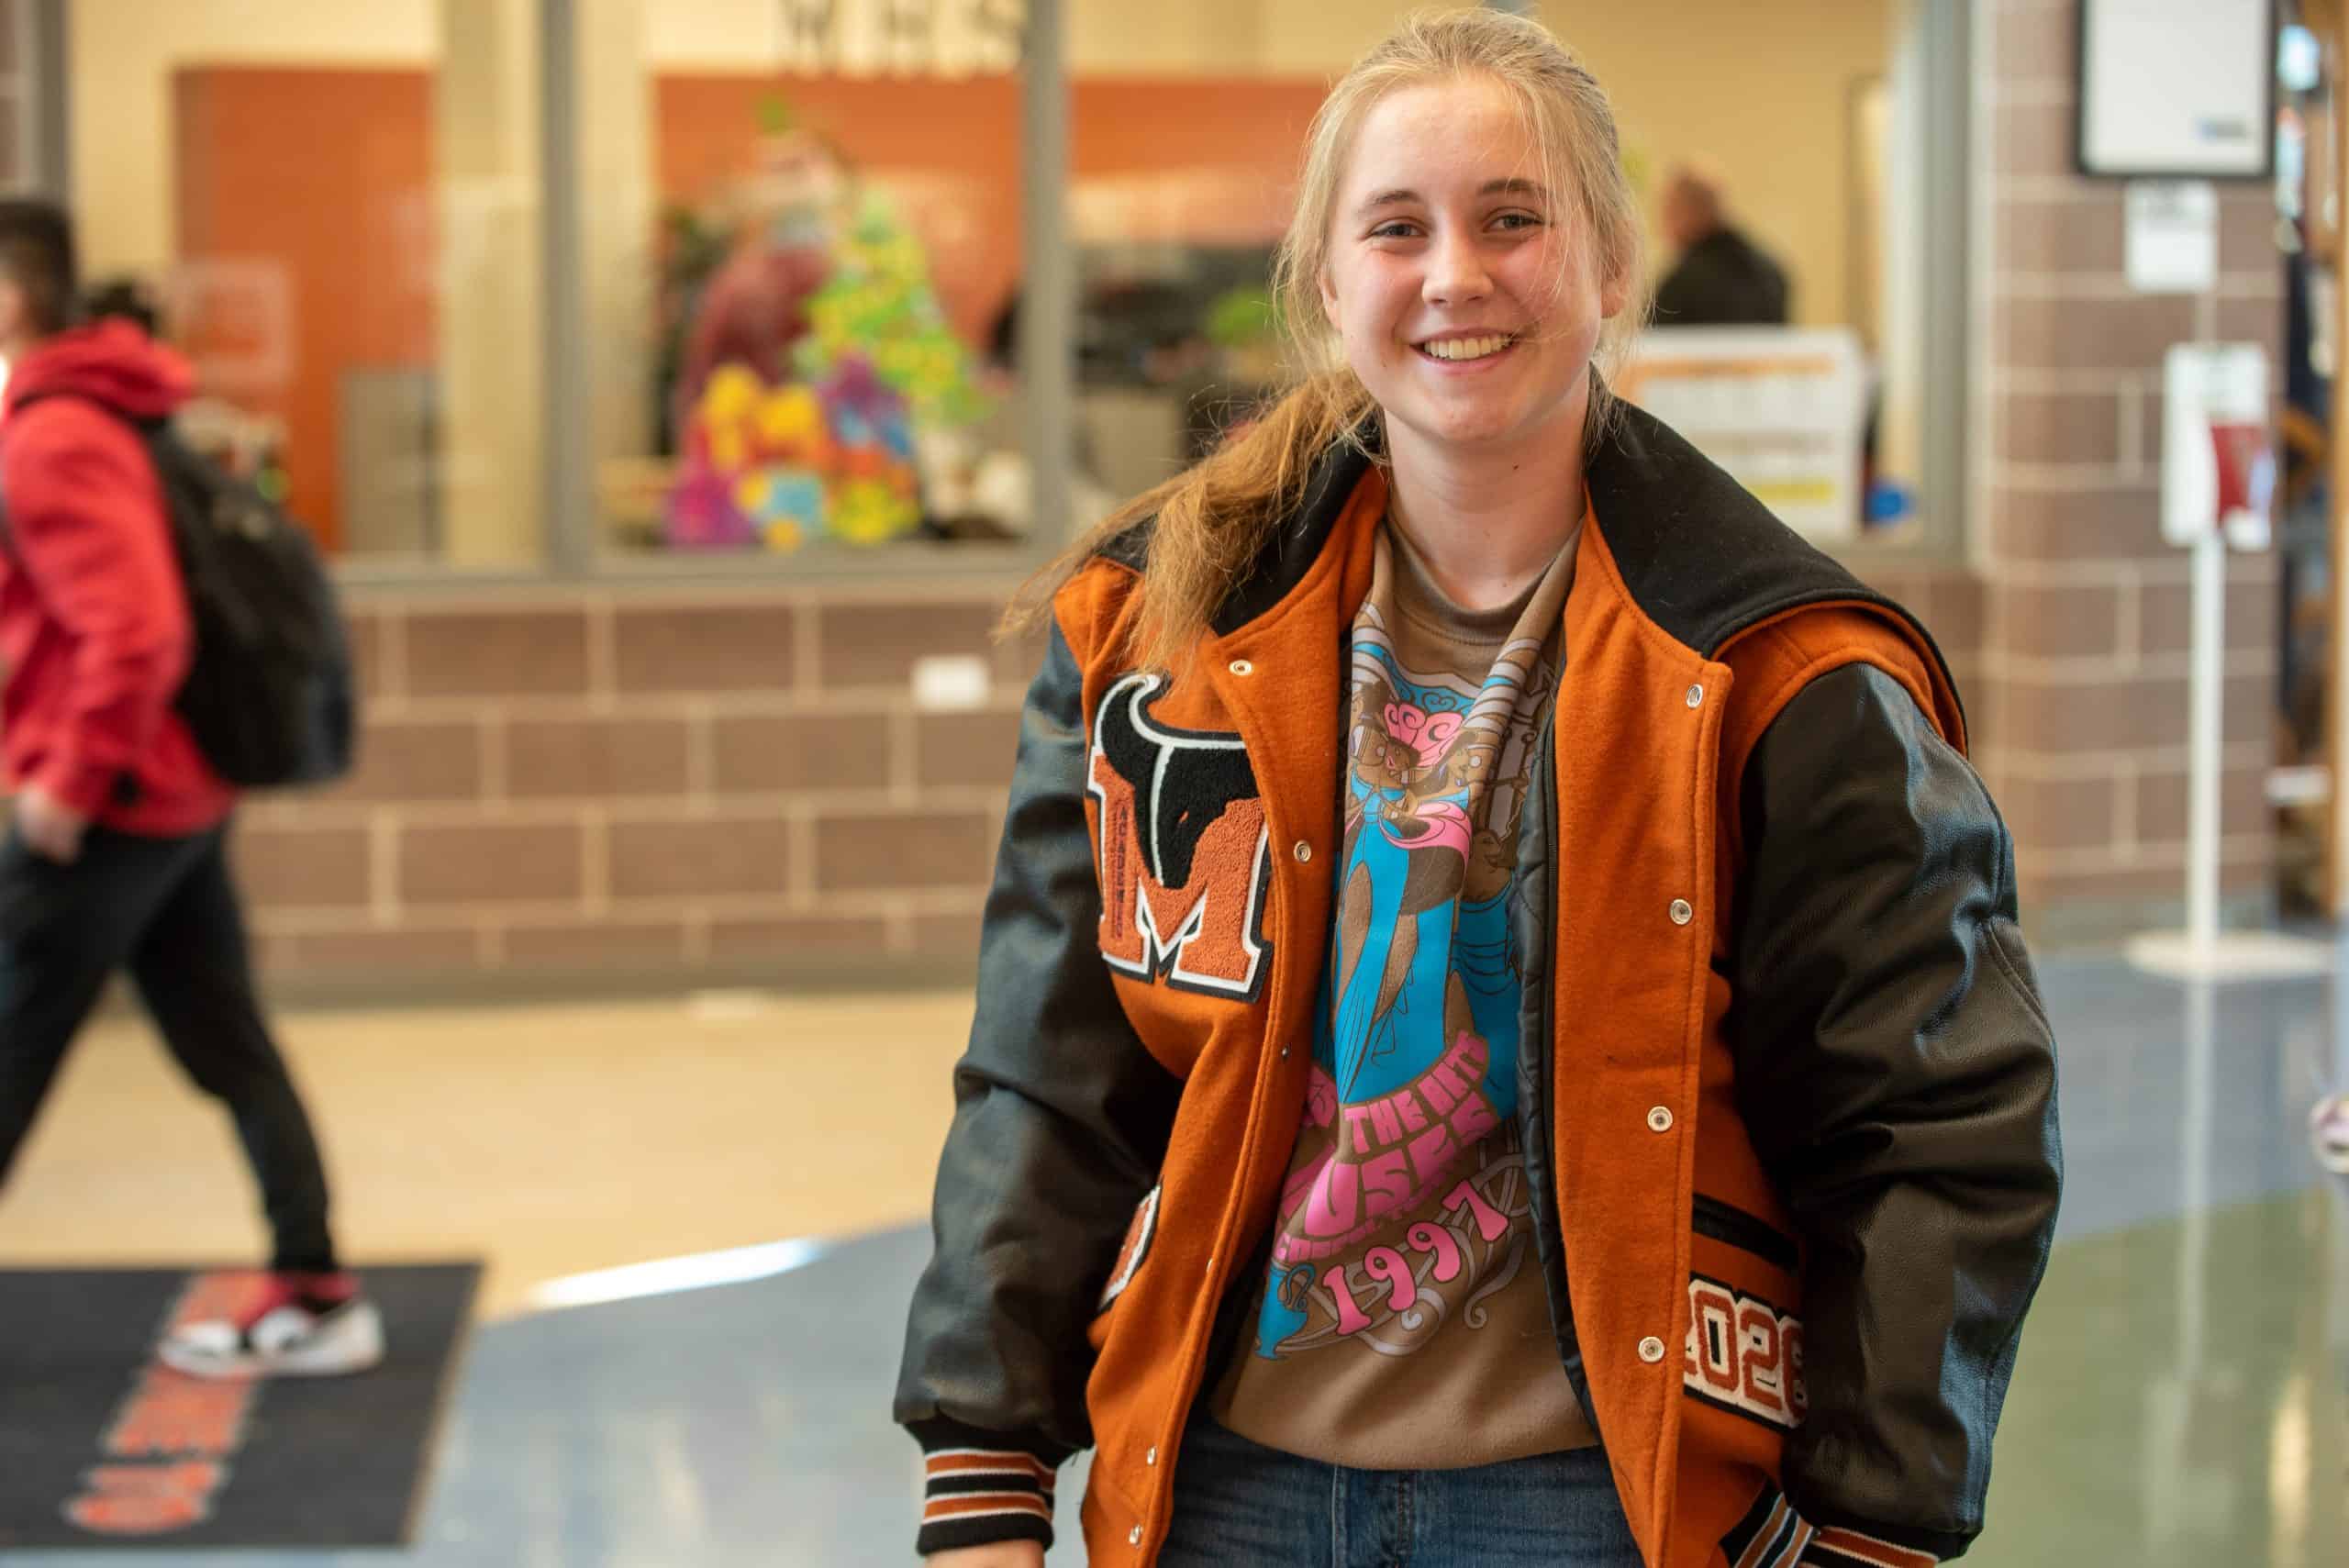 Female high school student trying on her new letterman jacket on in the school lobby.